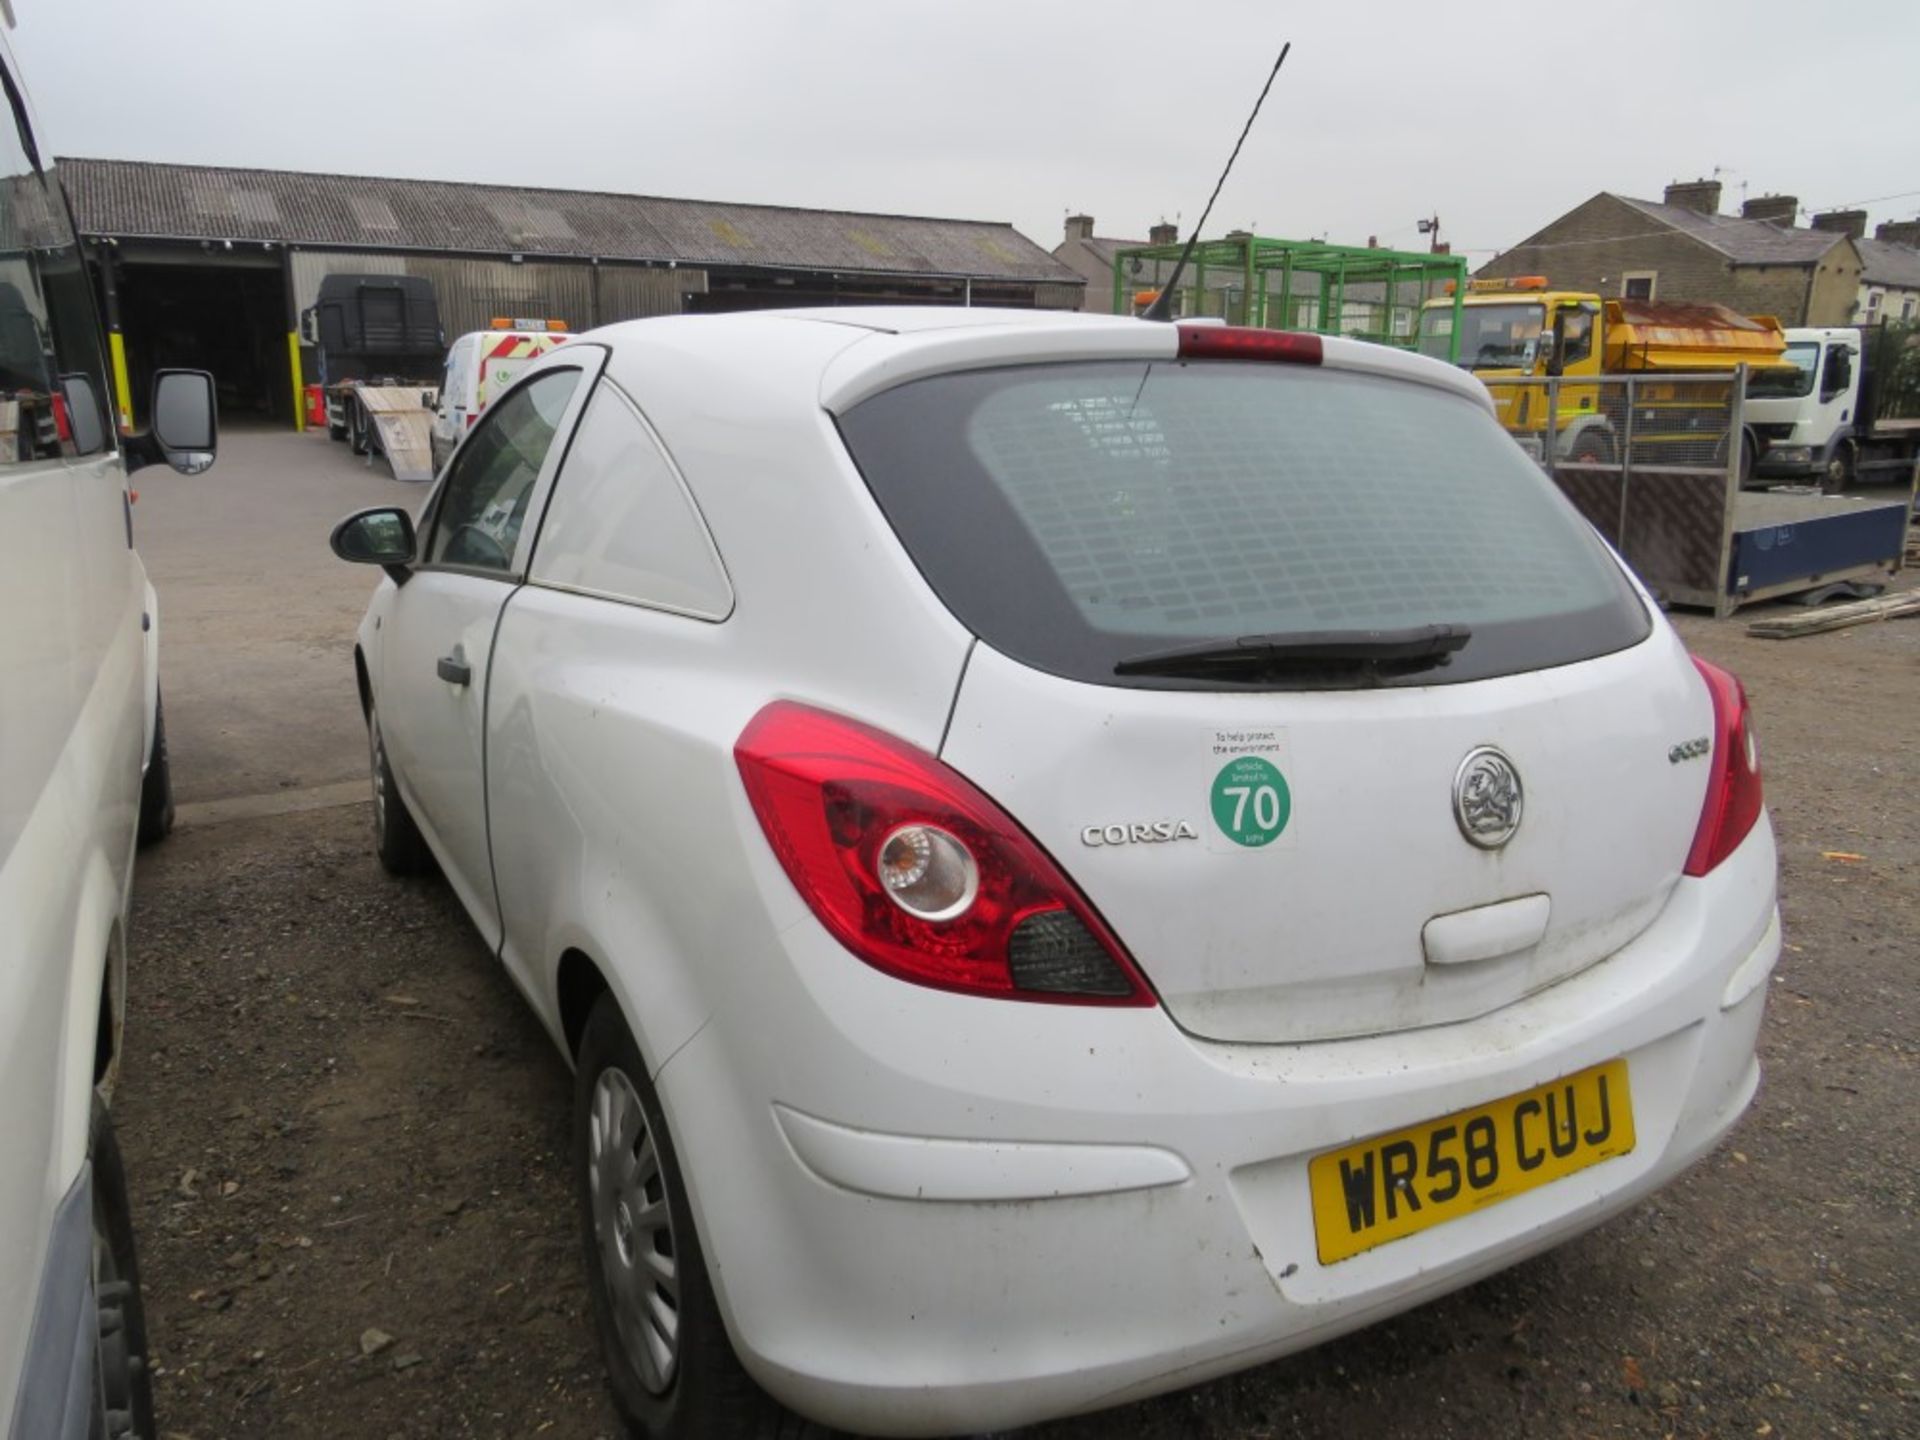 58 reg VAUXHALL CORSA CDTI VAN, 1ST REG 12/08, 73424M NOT WARRANTED, V5 HERE, 1 OWNER FROM NEW ( - Image 3 of 5